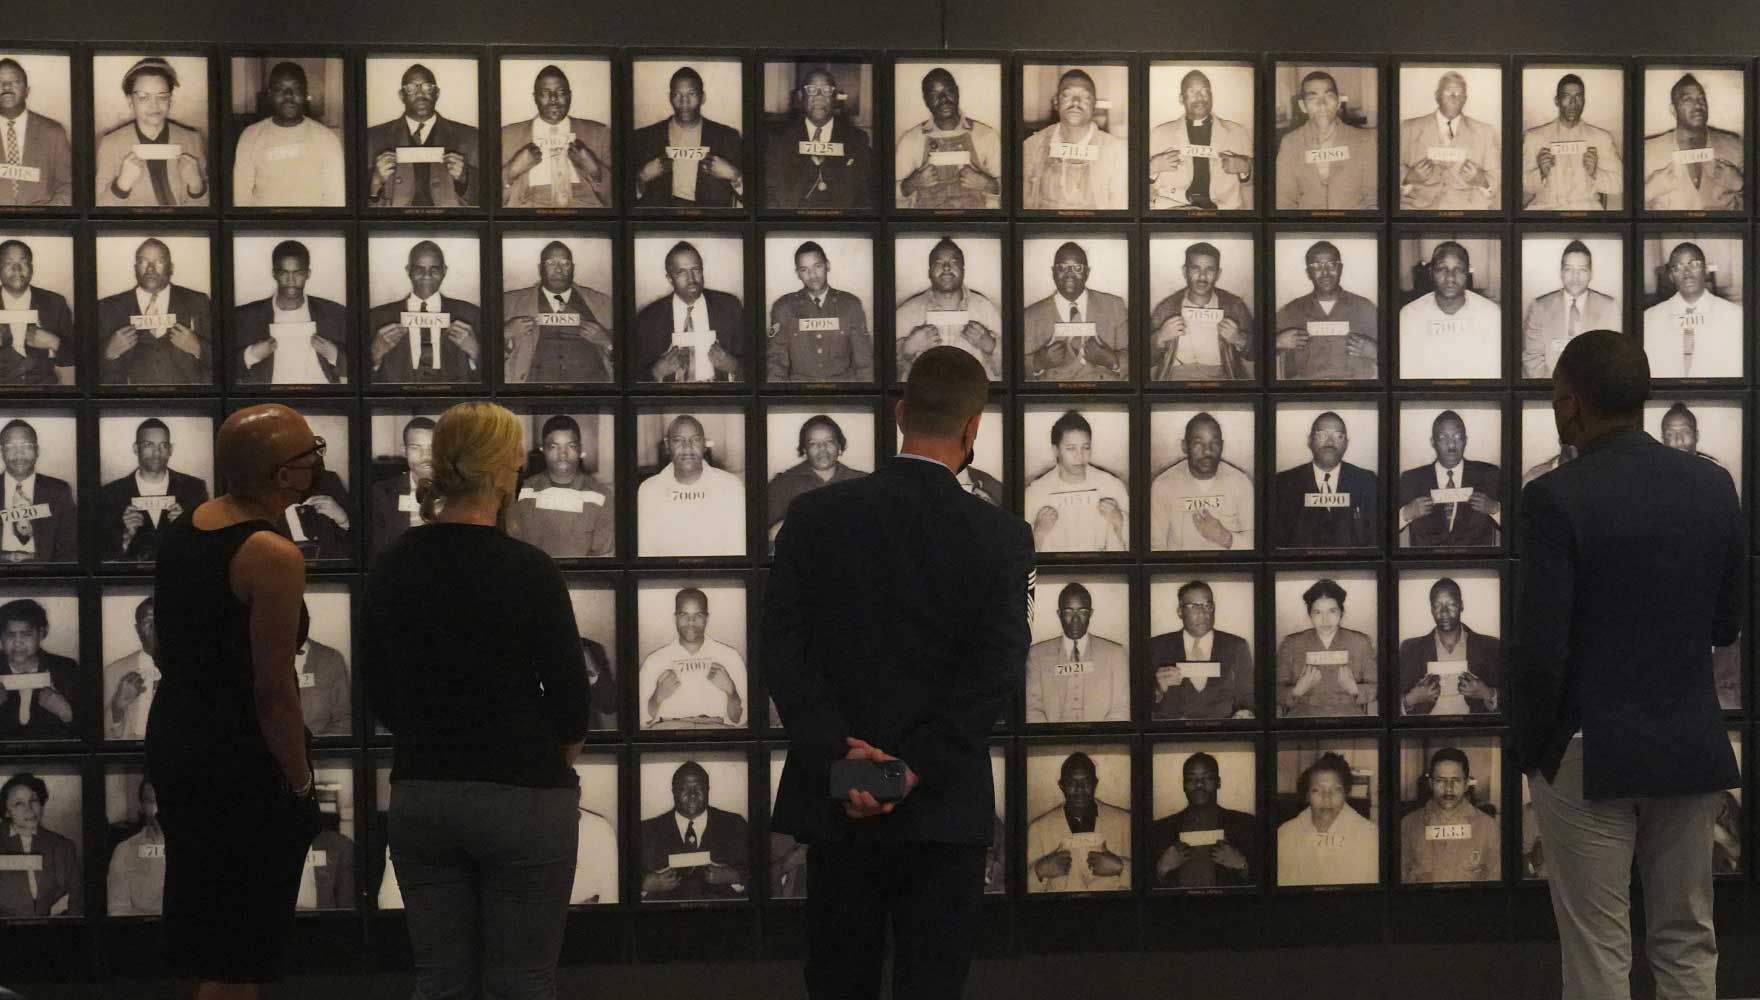 Visitors to the Legacy Museum gaze upon the booking photographs of the dozens of people who were arrested for taking part in the Montgomery Bus Boycott, including Rosa Parks and Dr. Martin Luther King Jr.